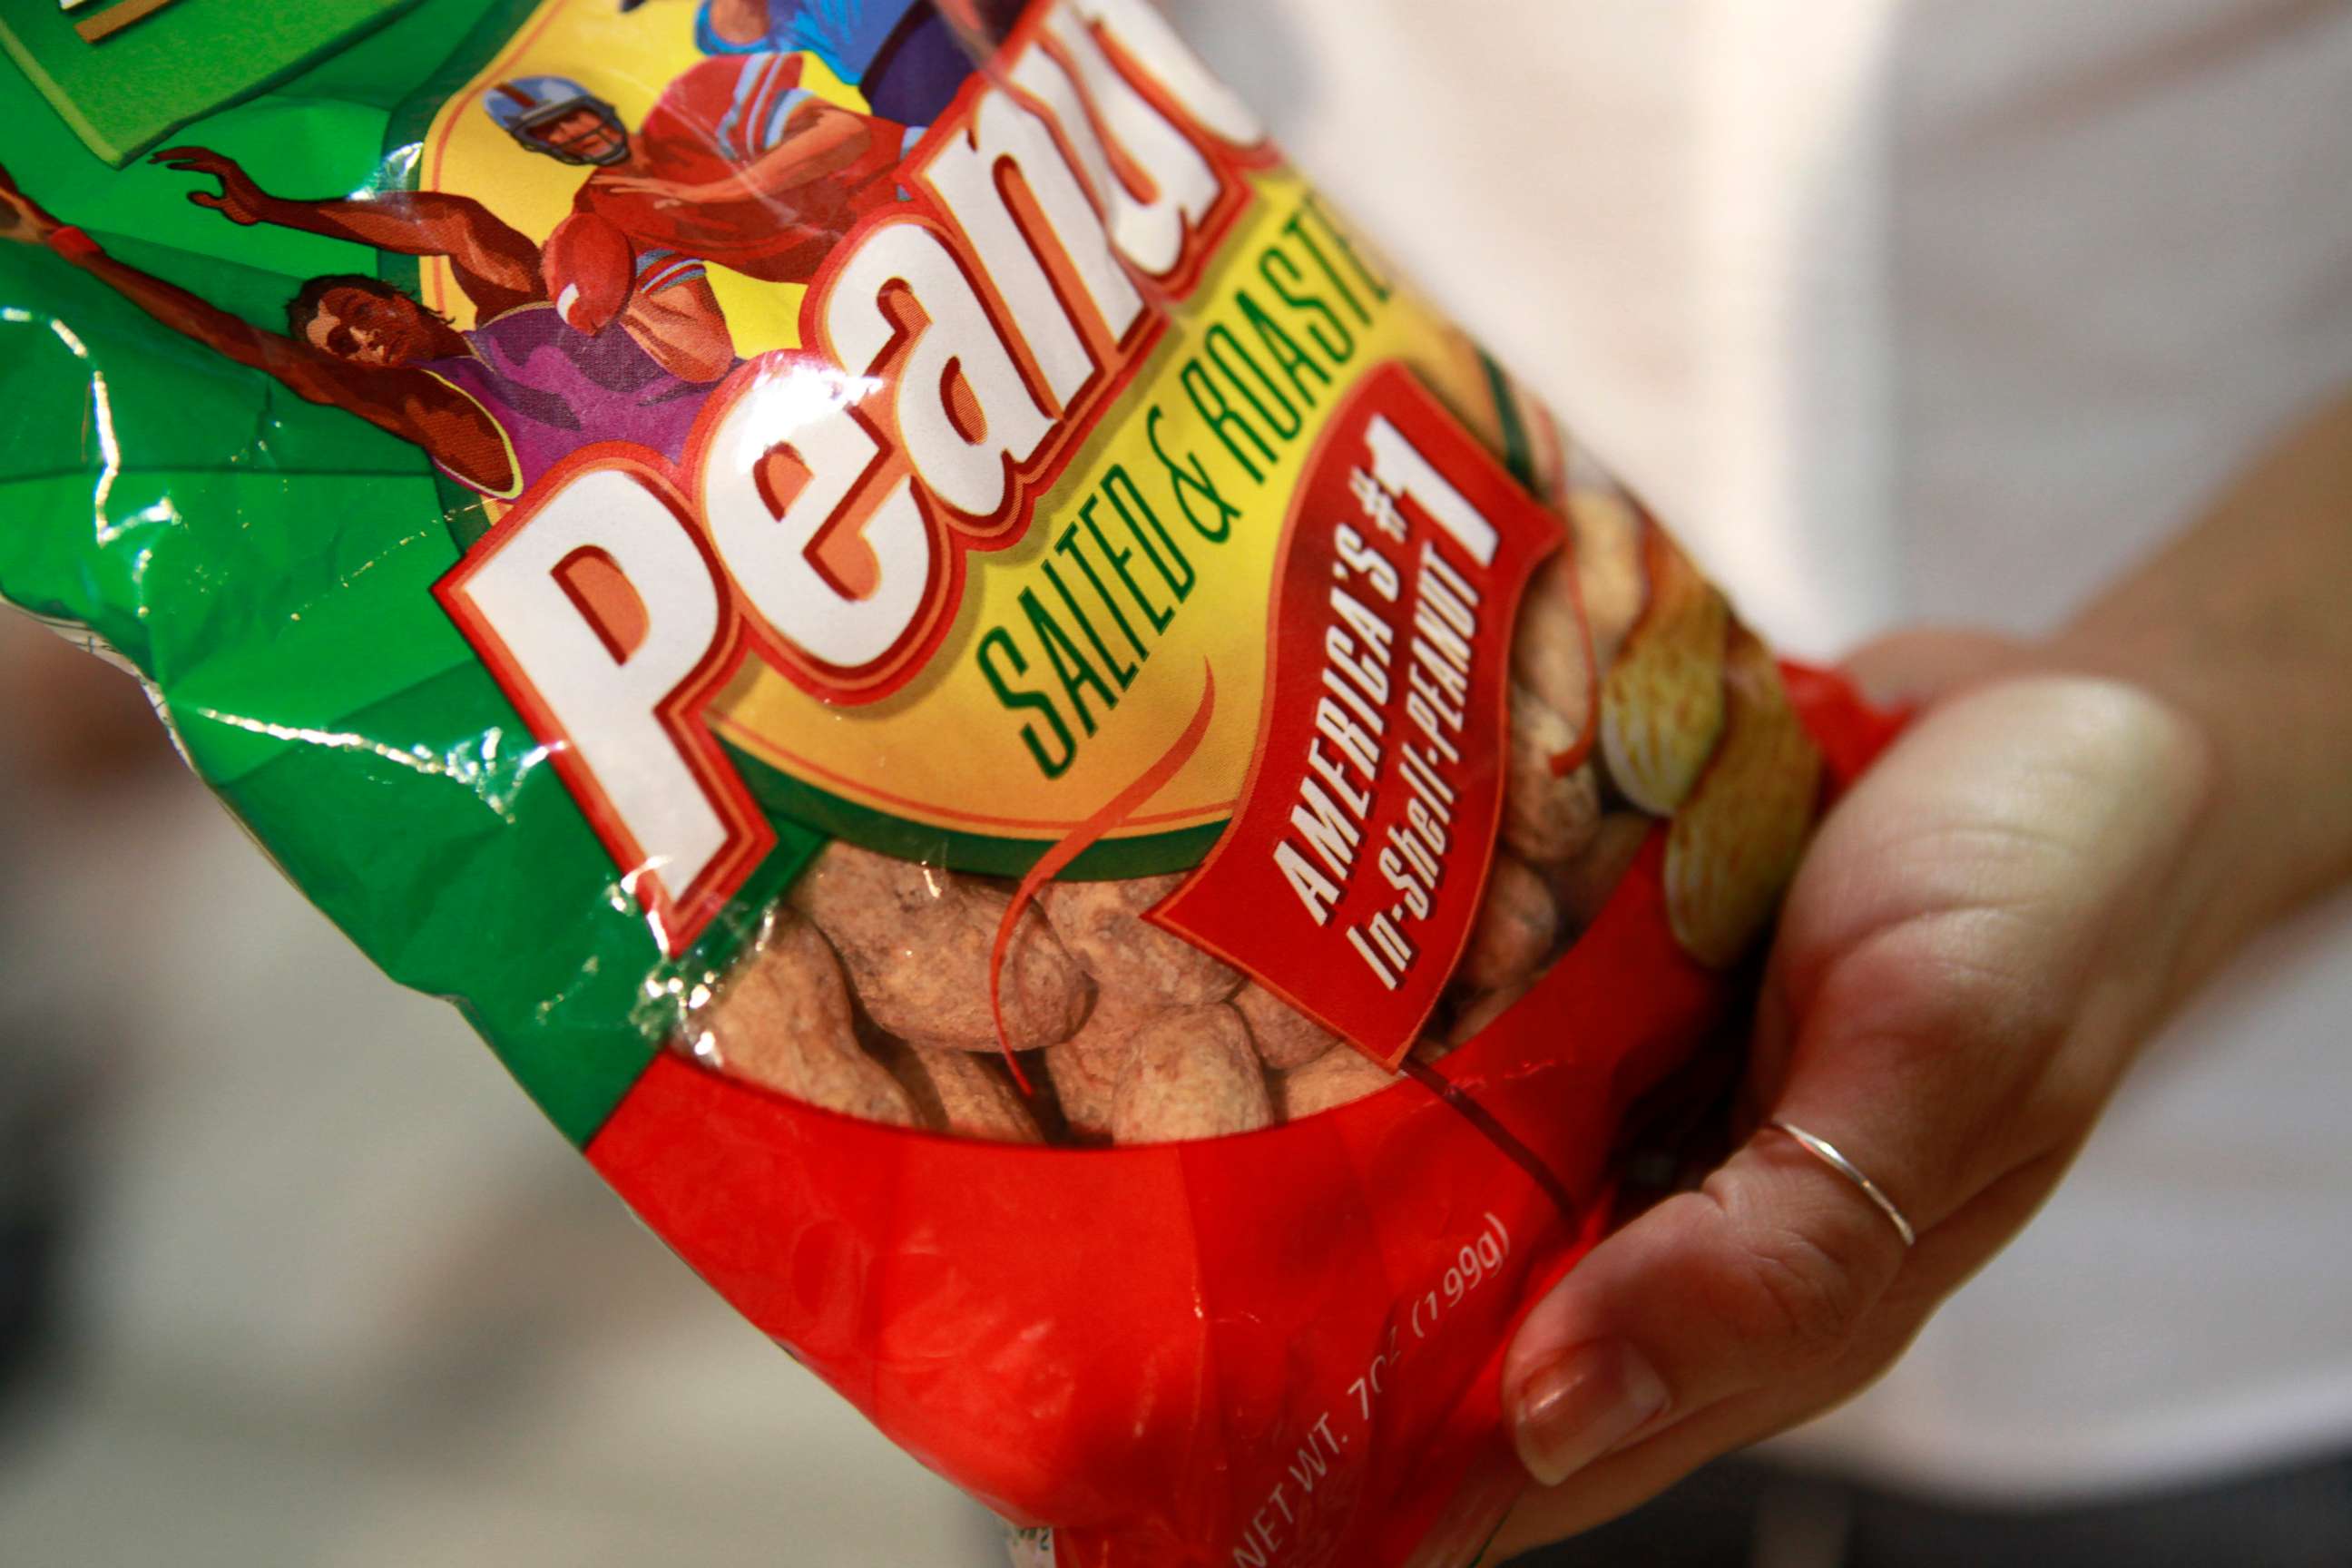 PHOTO: In this  July 31, 2010 file photo, a bag of peanuts is seen at Nationals Park in Washington. Government health experts are urging approval of a novel treatment for children with life-threatening peanut allergies.